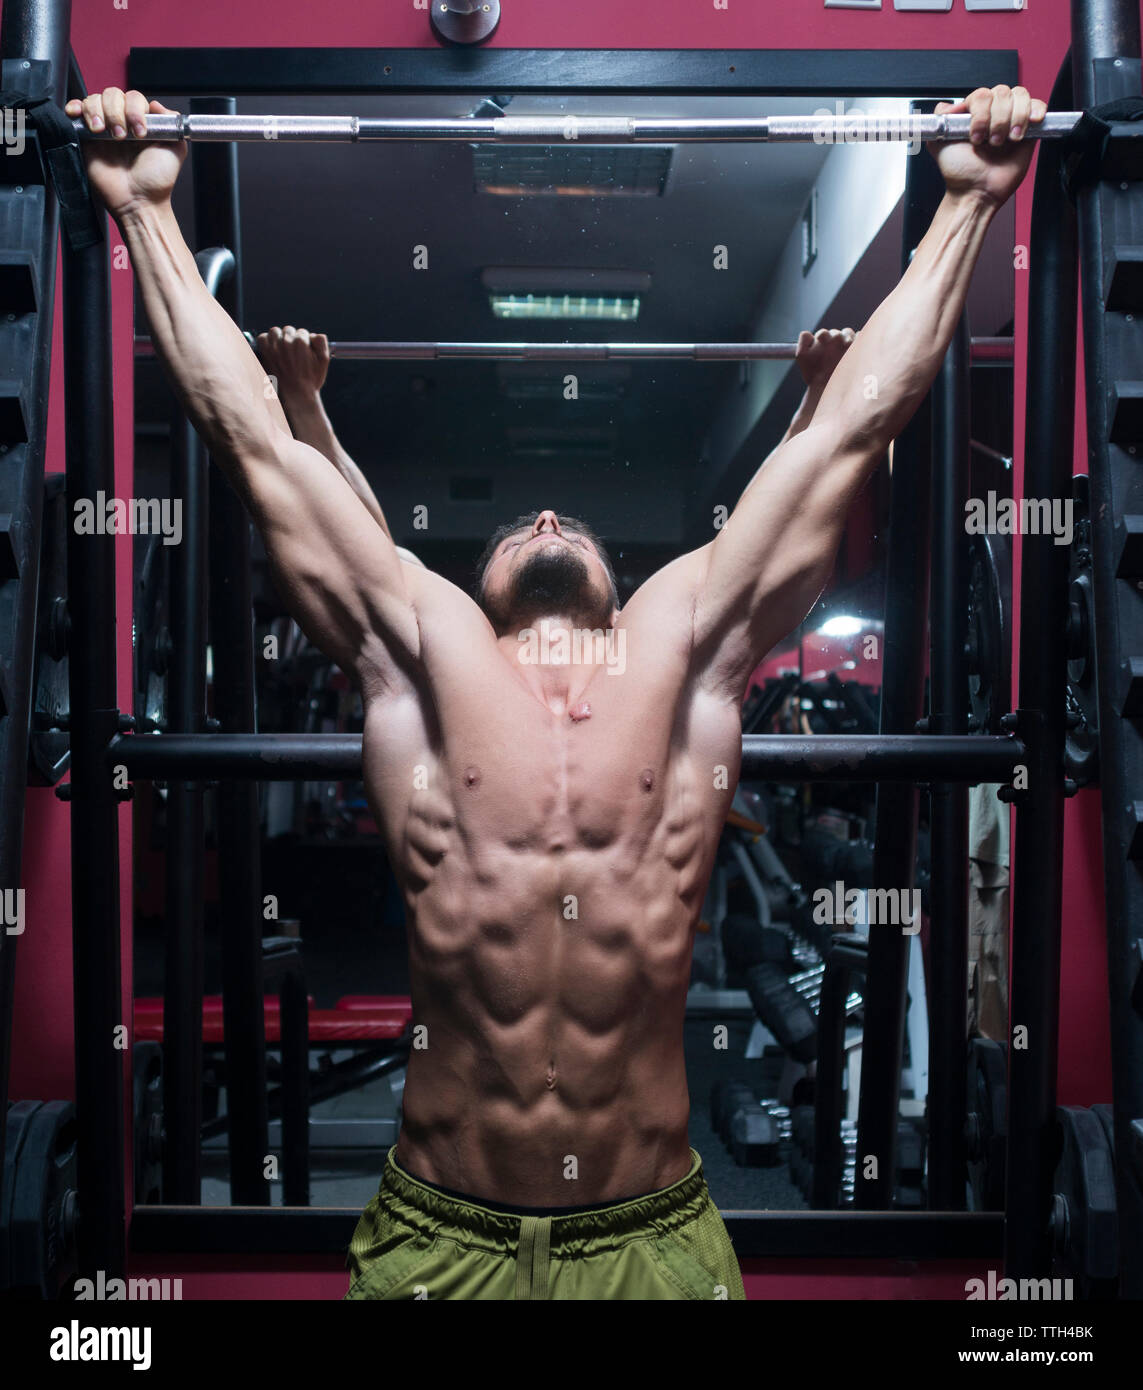 Man working out doing chin ups in the gym Stock Photo